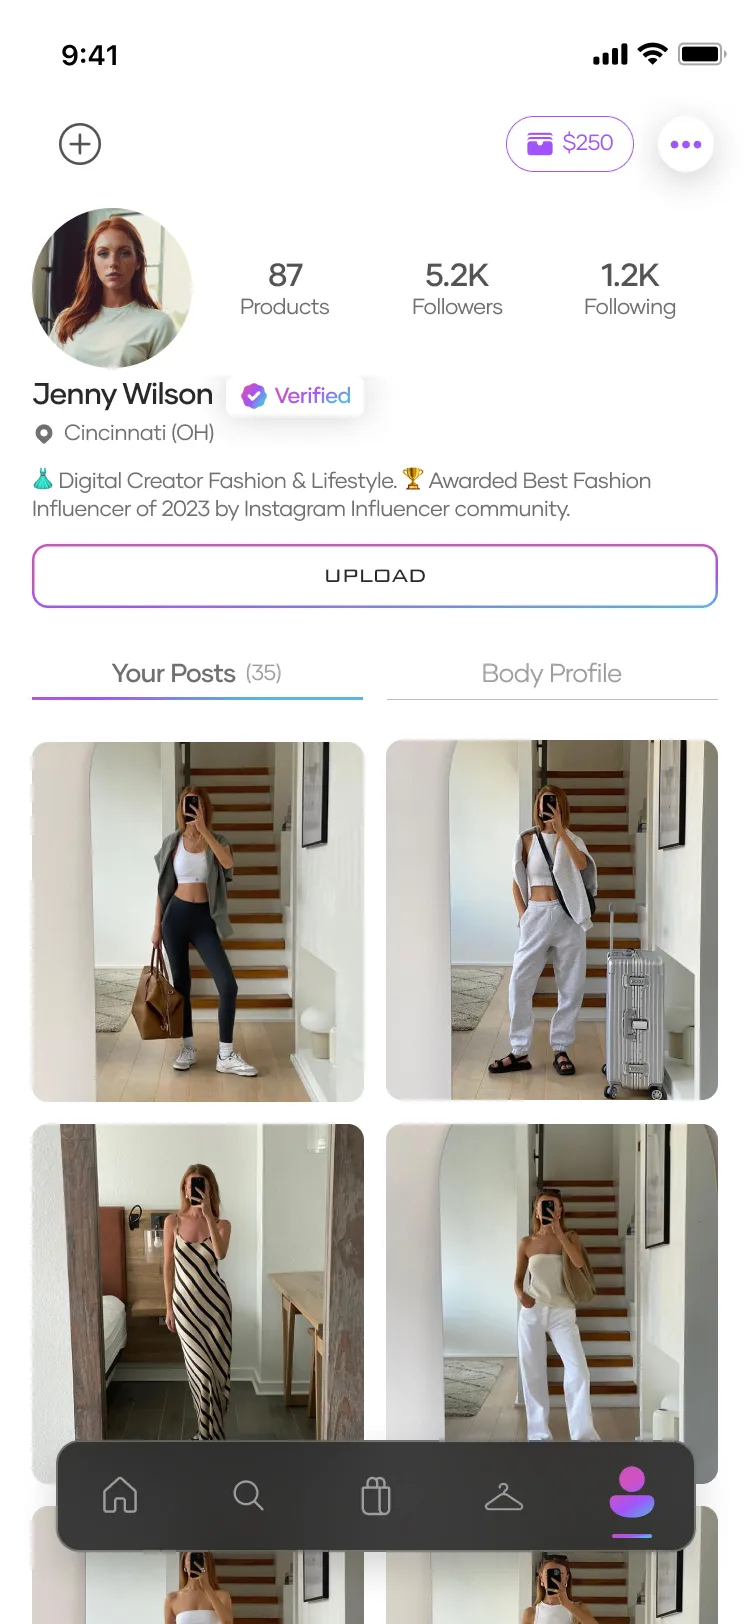 Your profile, your fashion store